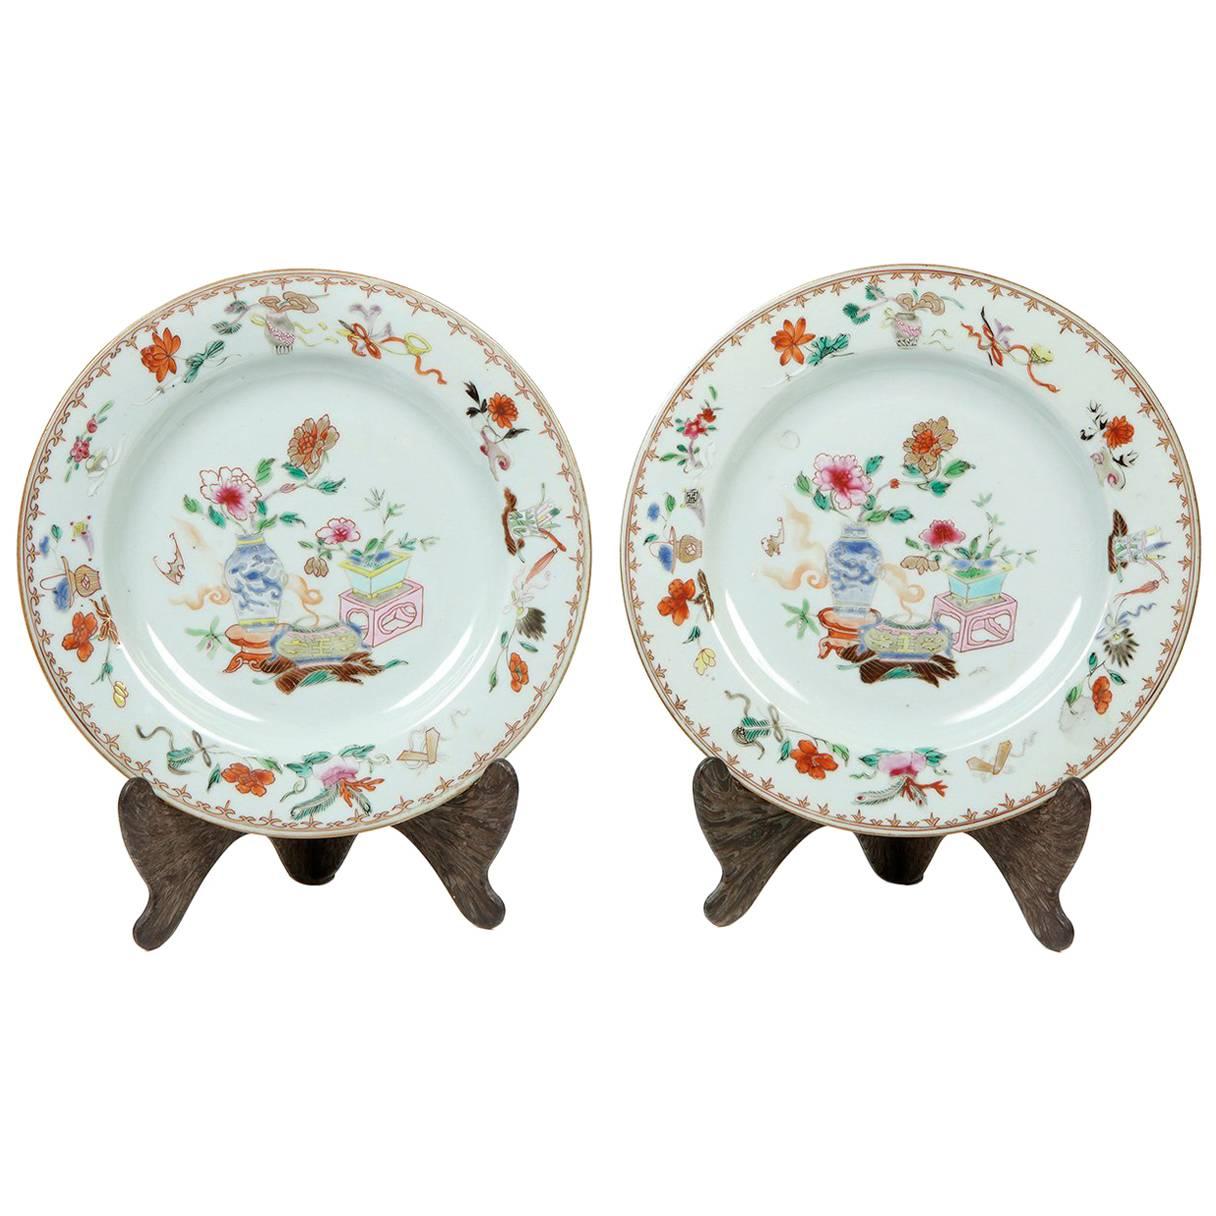 "India Company" Pair of Dishes, Porcelain, 19th Century